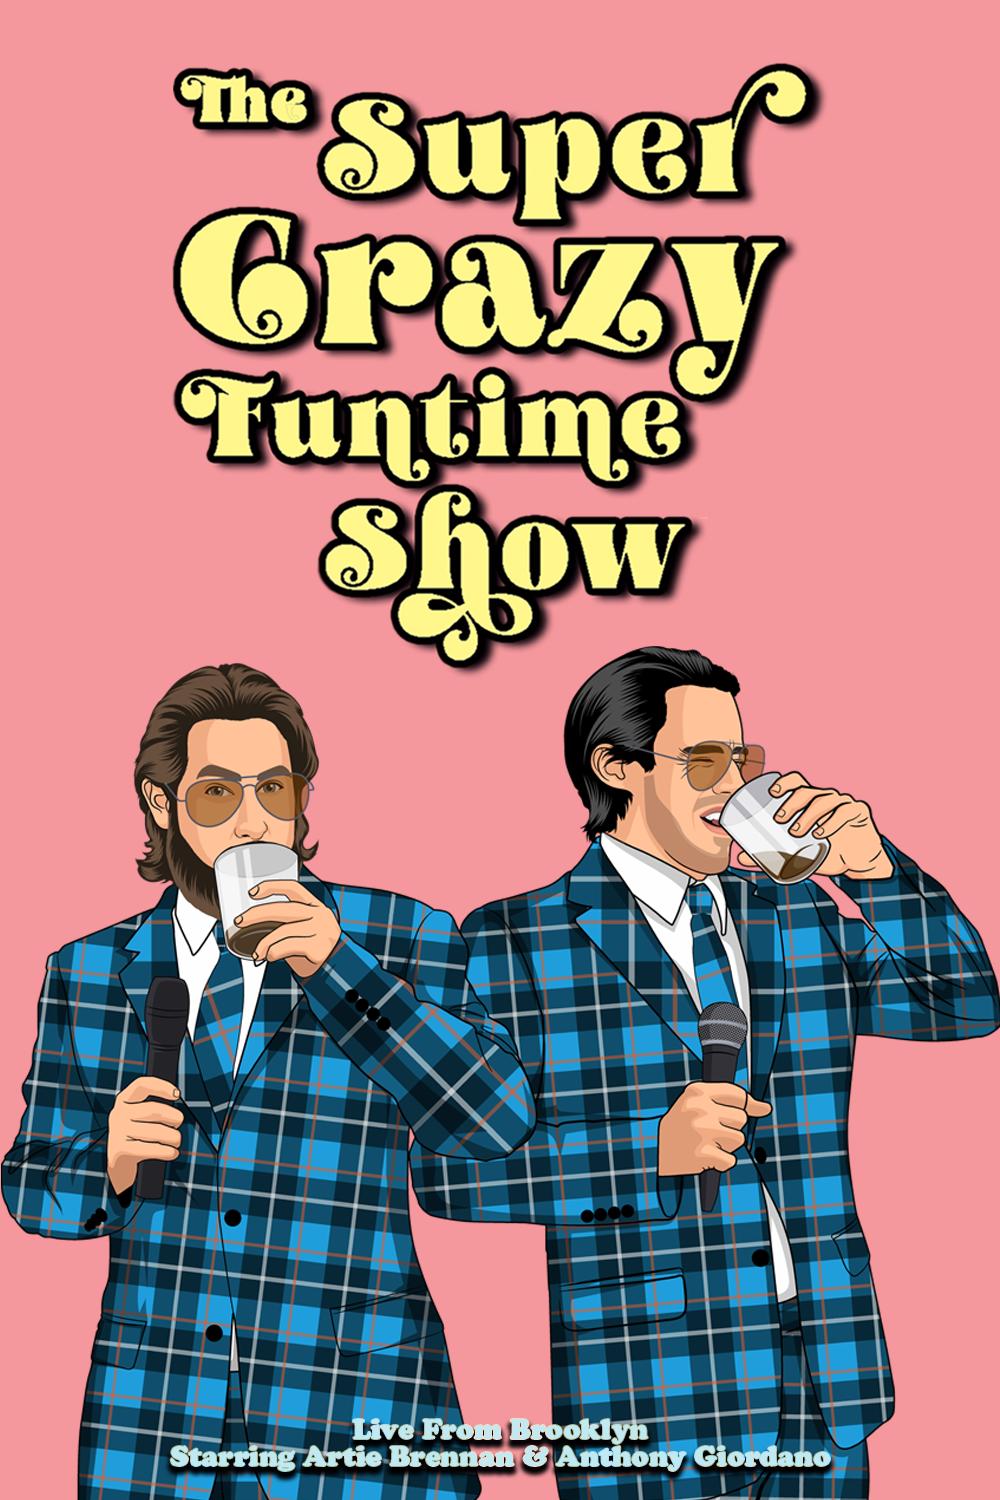 The Super Crazy Funtime Show